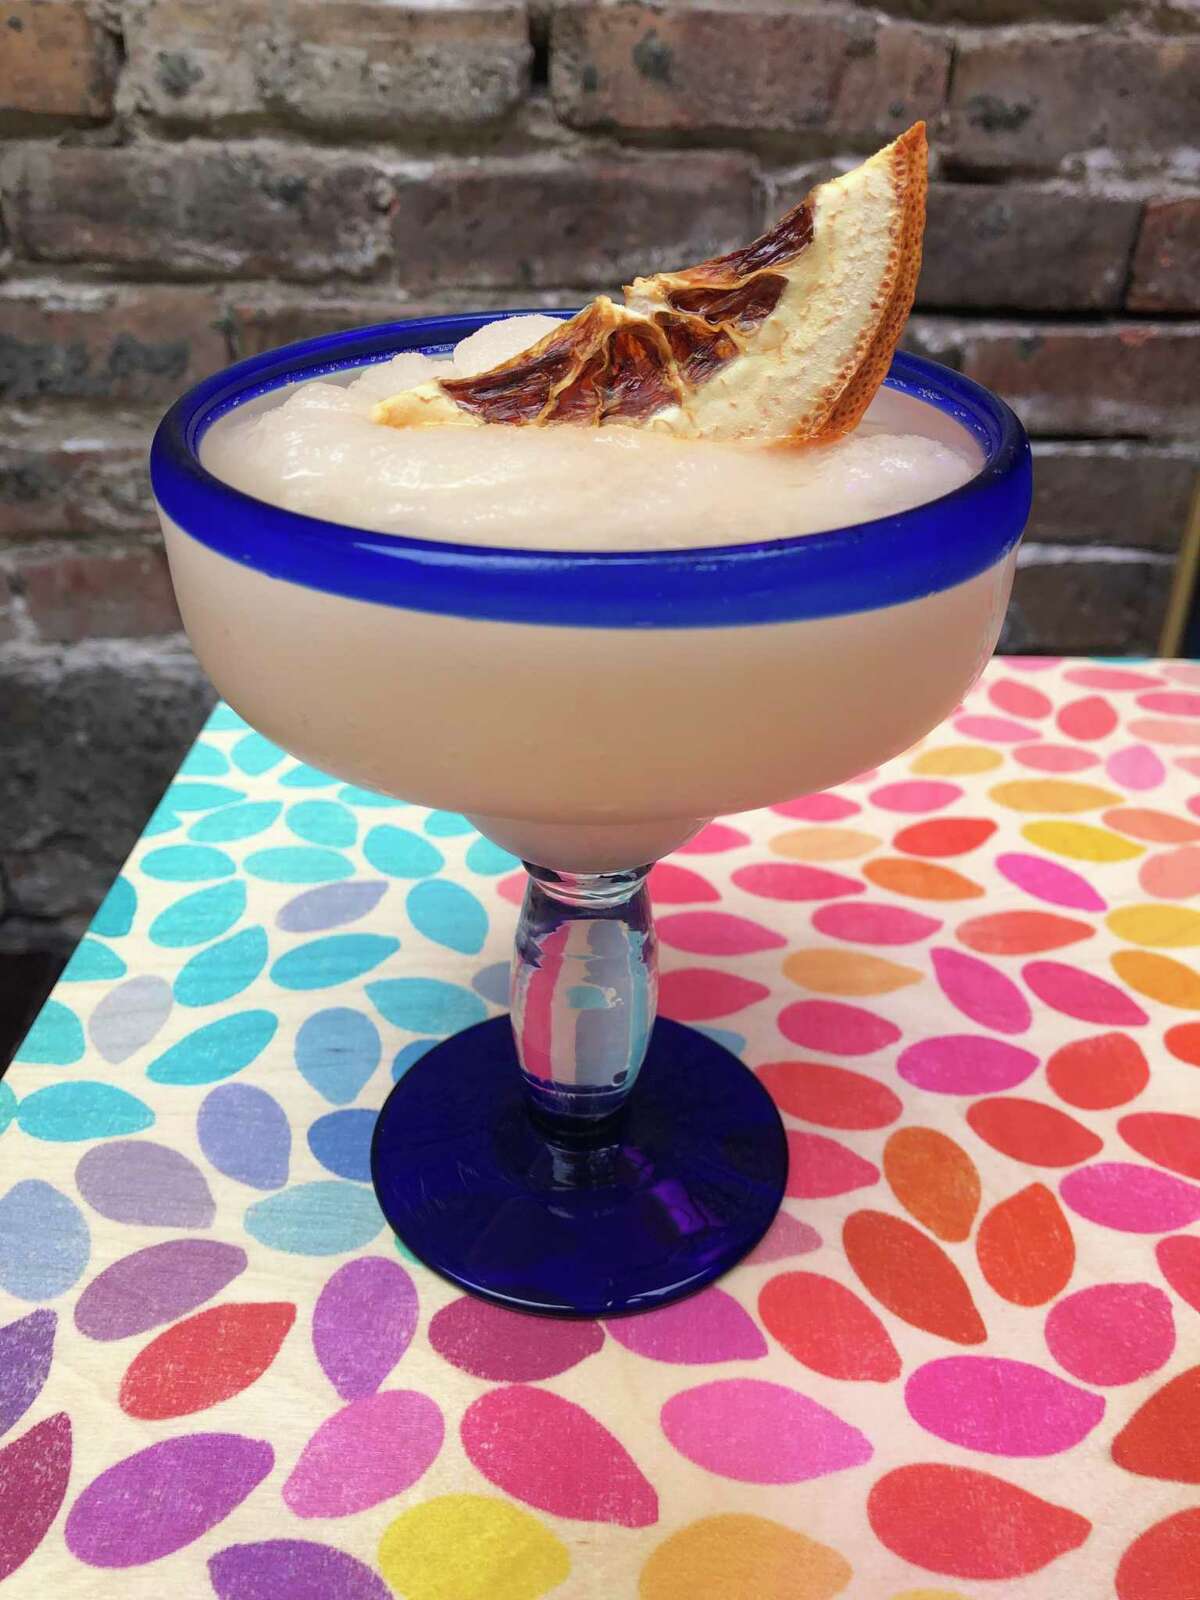 Angel Share's Frozen Paloma is made with silver tequila, grapefruit juice, lime and salt tincture.